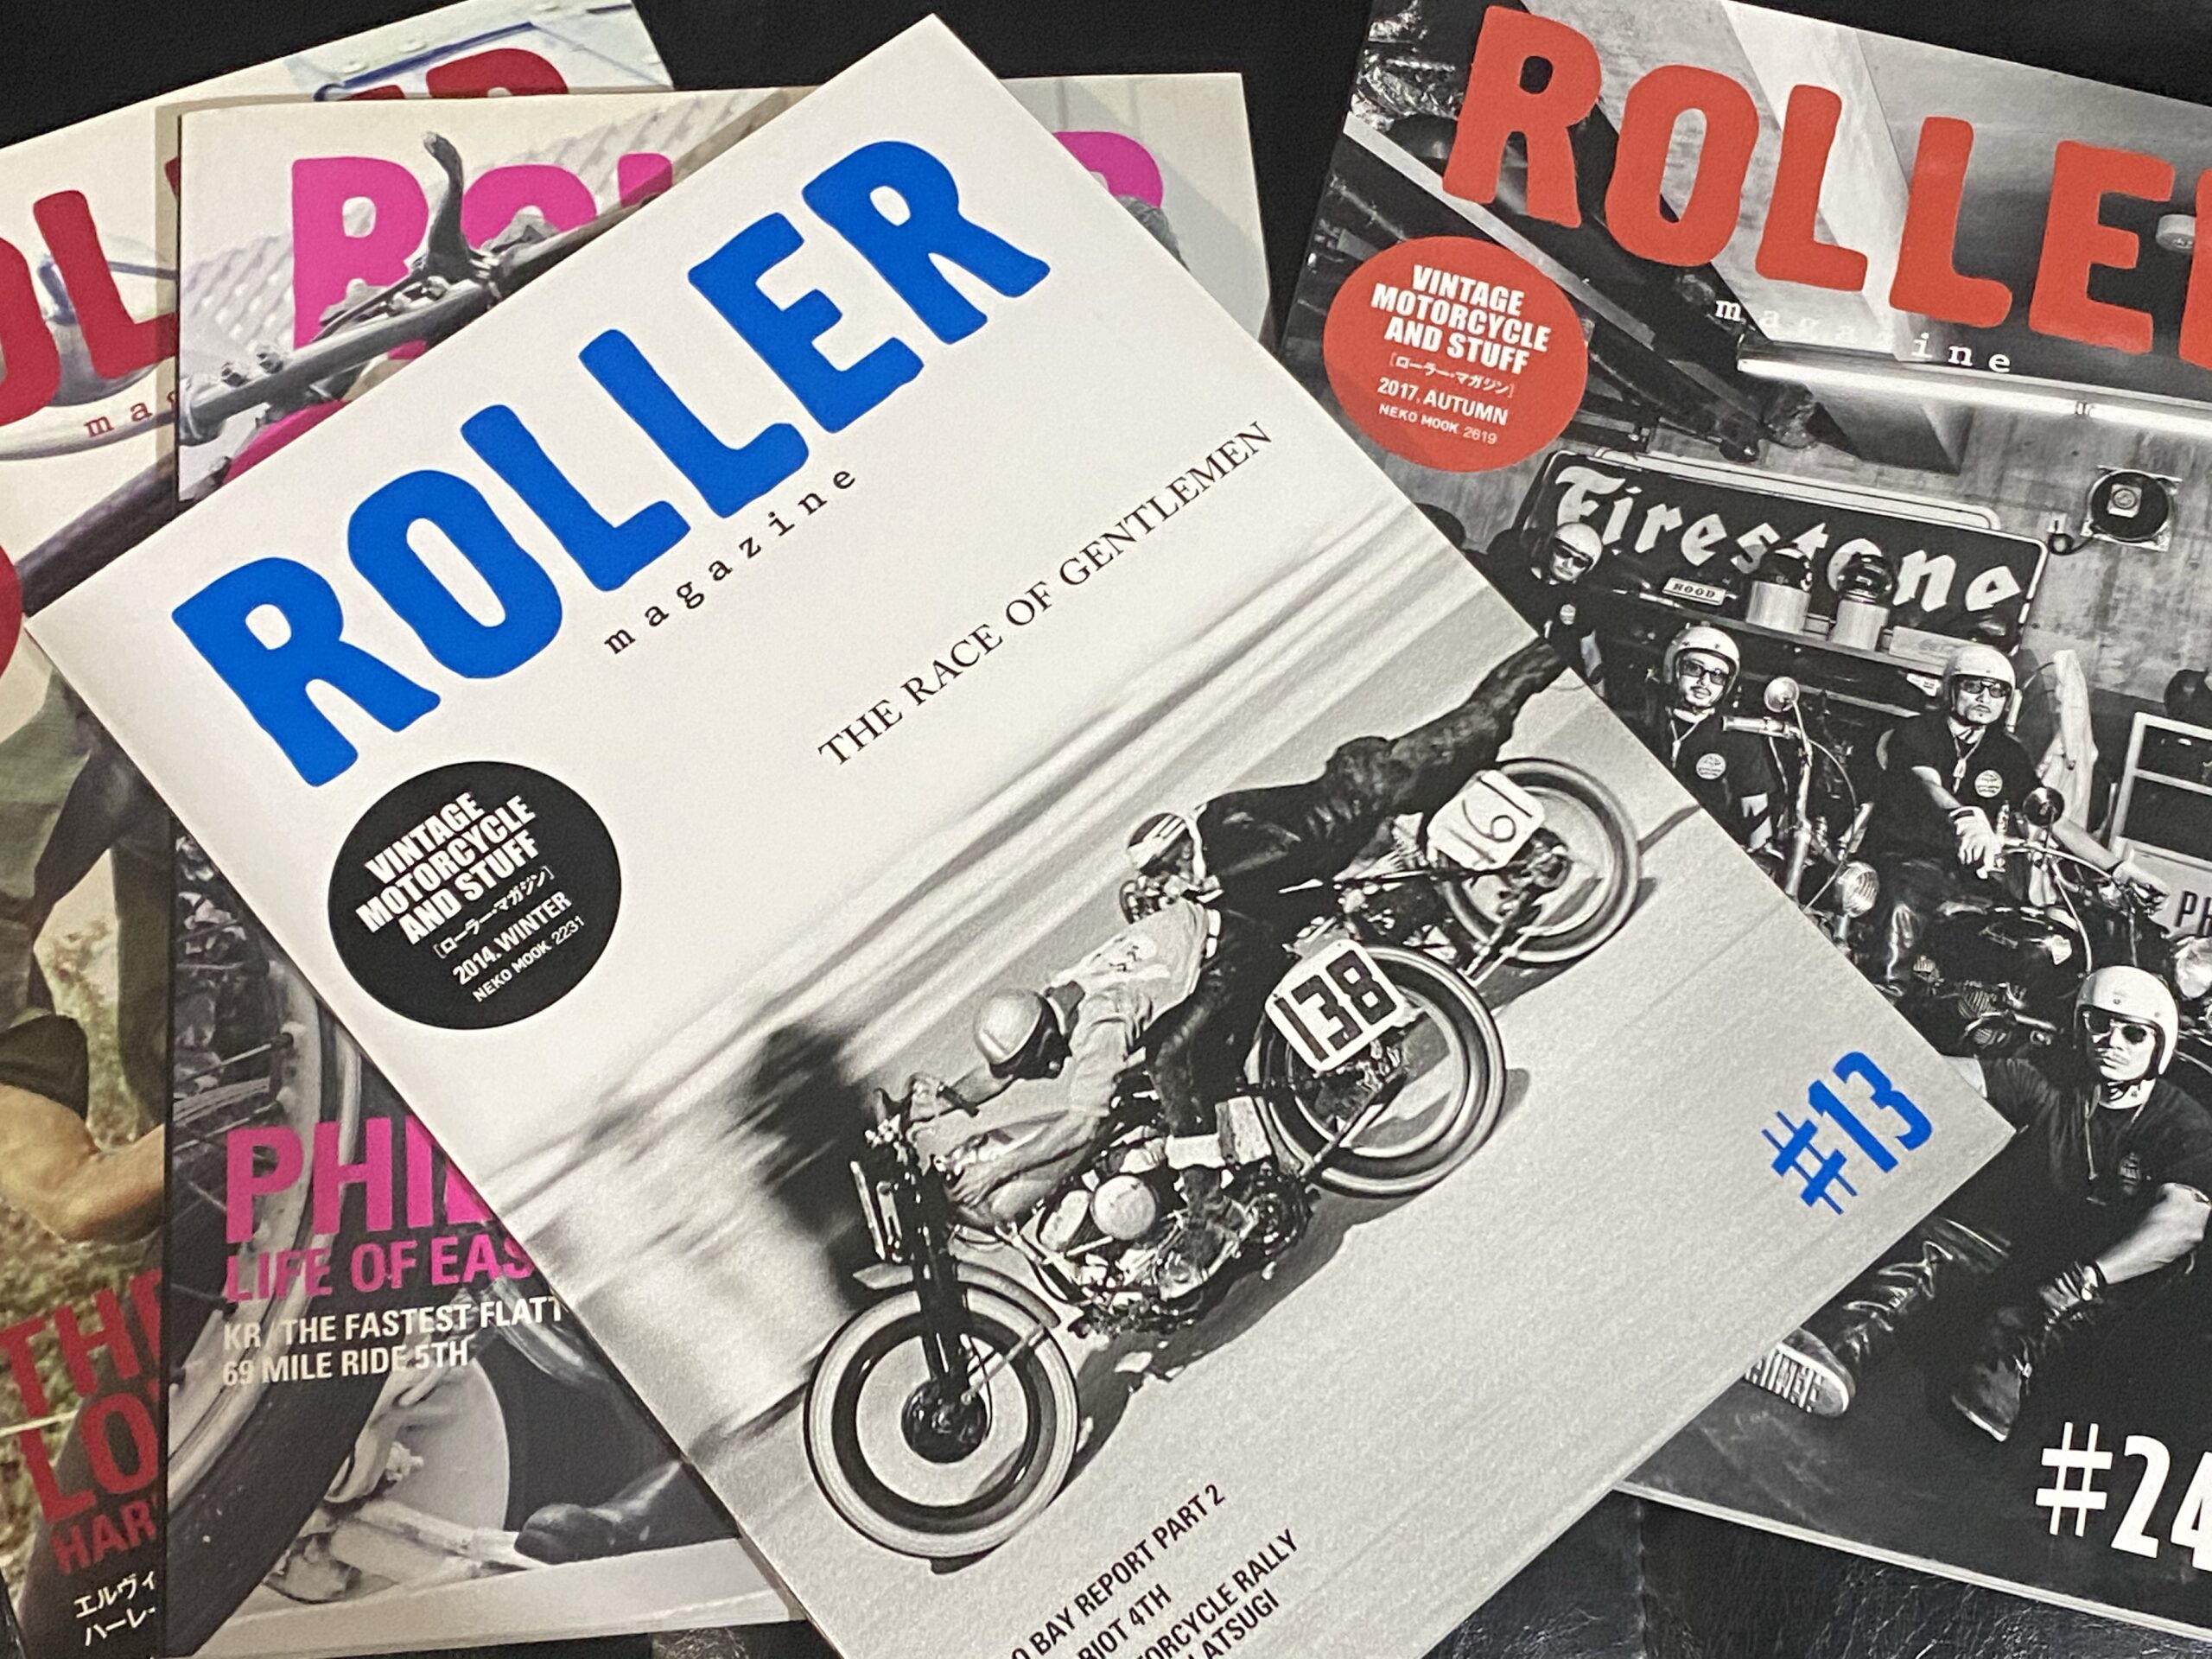 CHALLENGER×ROLLER magazine [ANTI-NORMAL]フェア in代官山蔦屋書店 